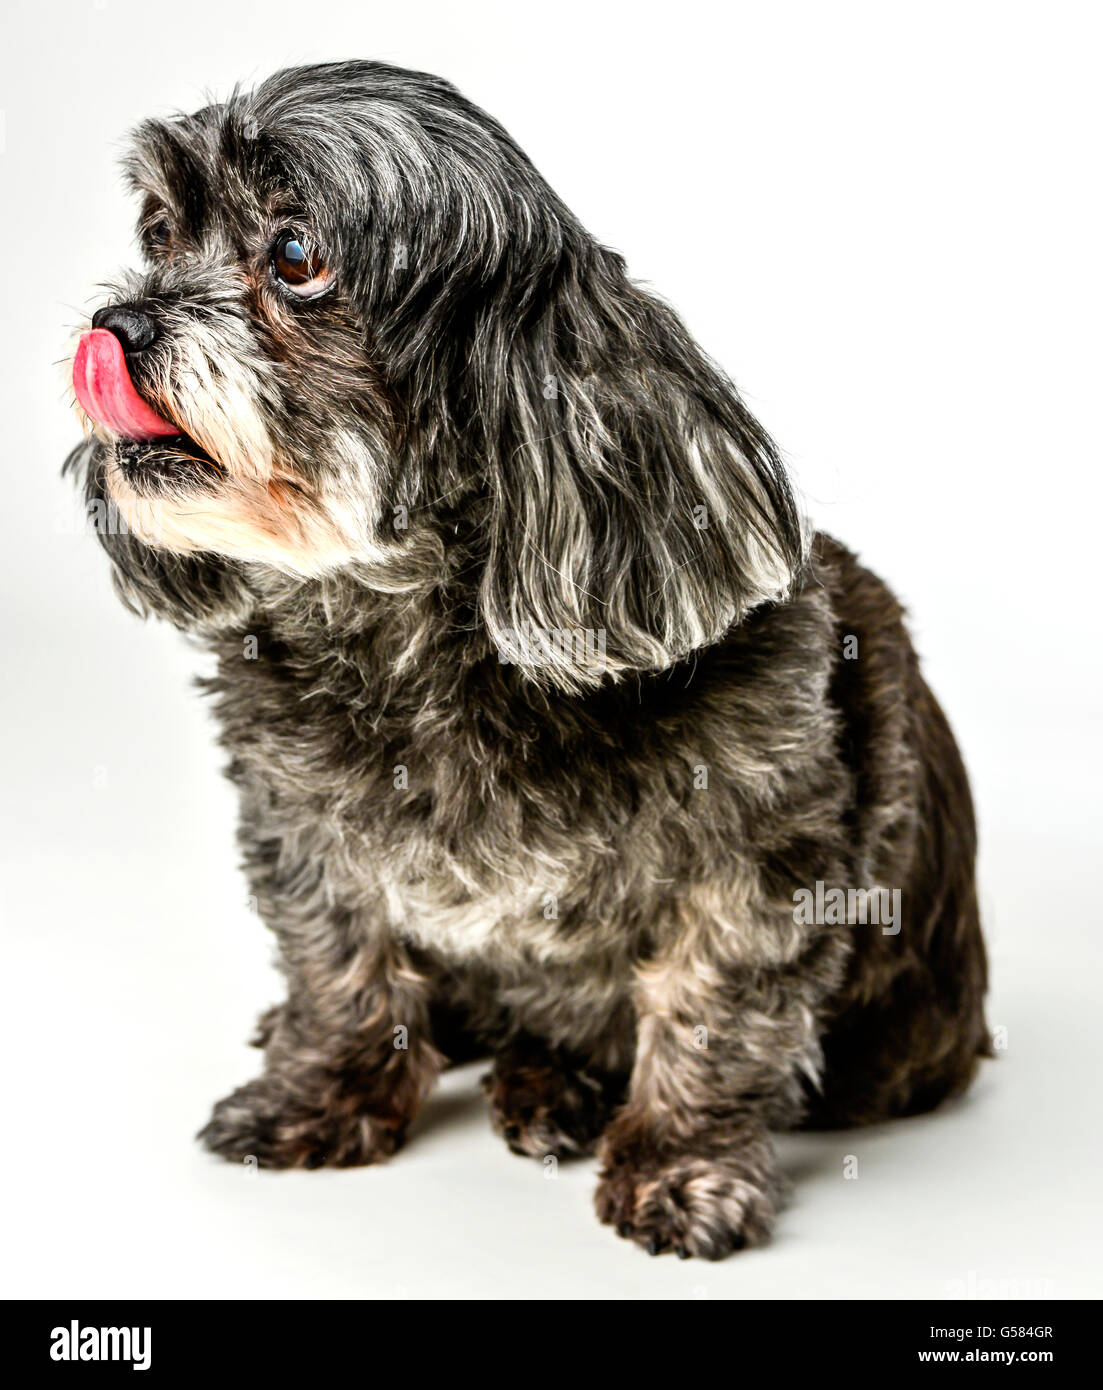 Profile of an adorable dark tri-colored mixed breed small dog with tongue out licking nose while sitting on white background Stock Photo